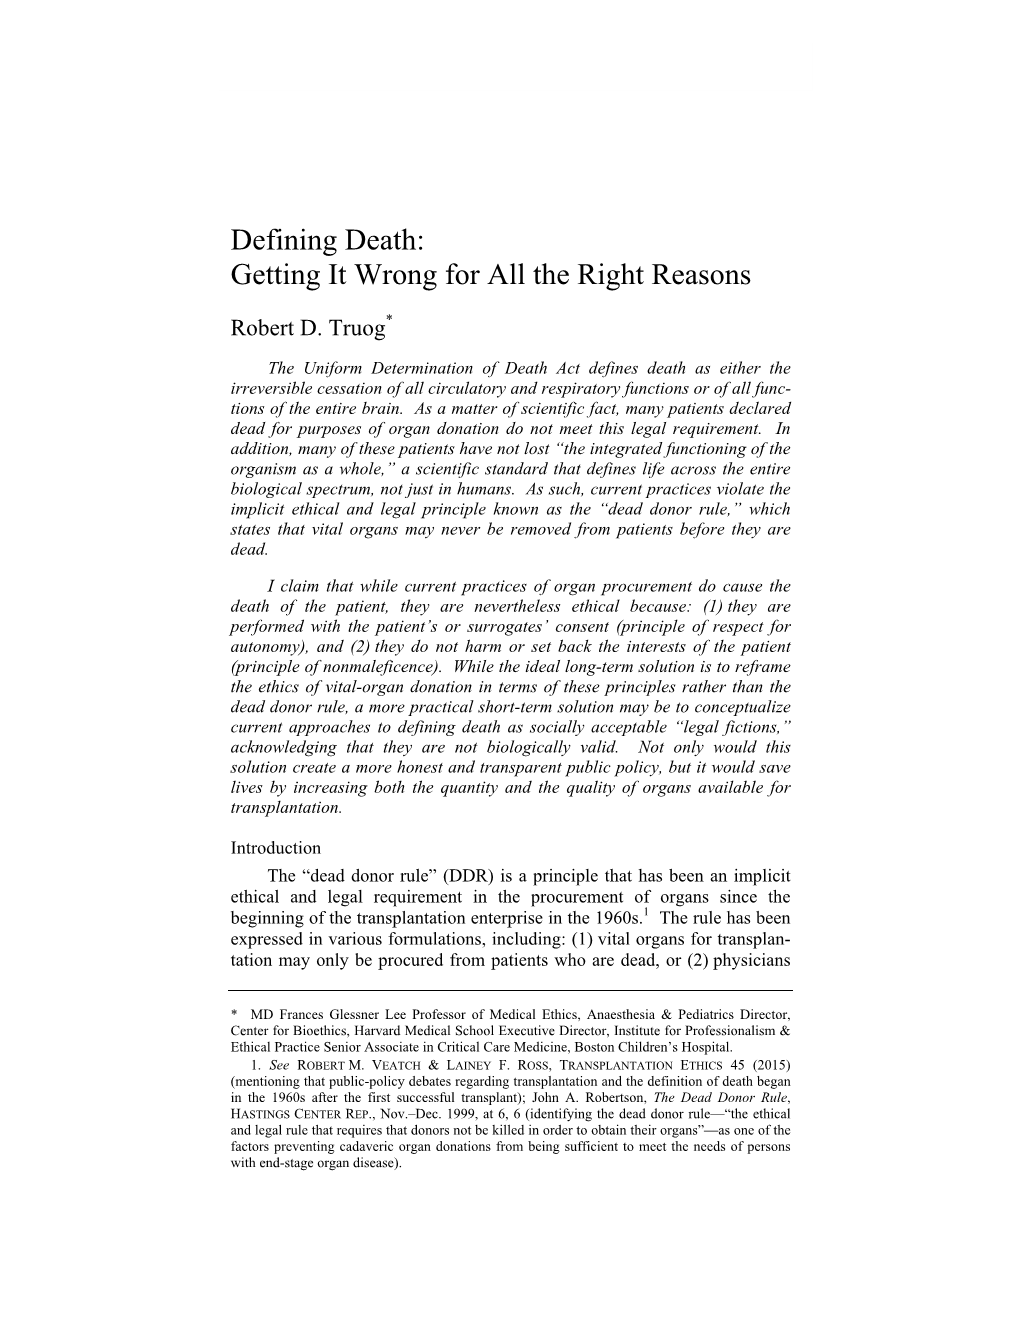 Defining Death: Getting It Wrong for All the Right Reasons